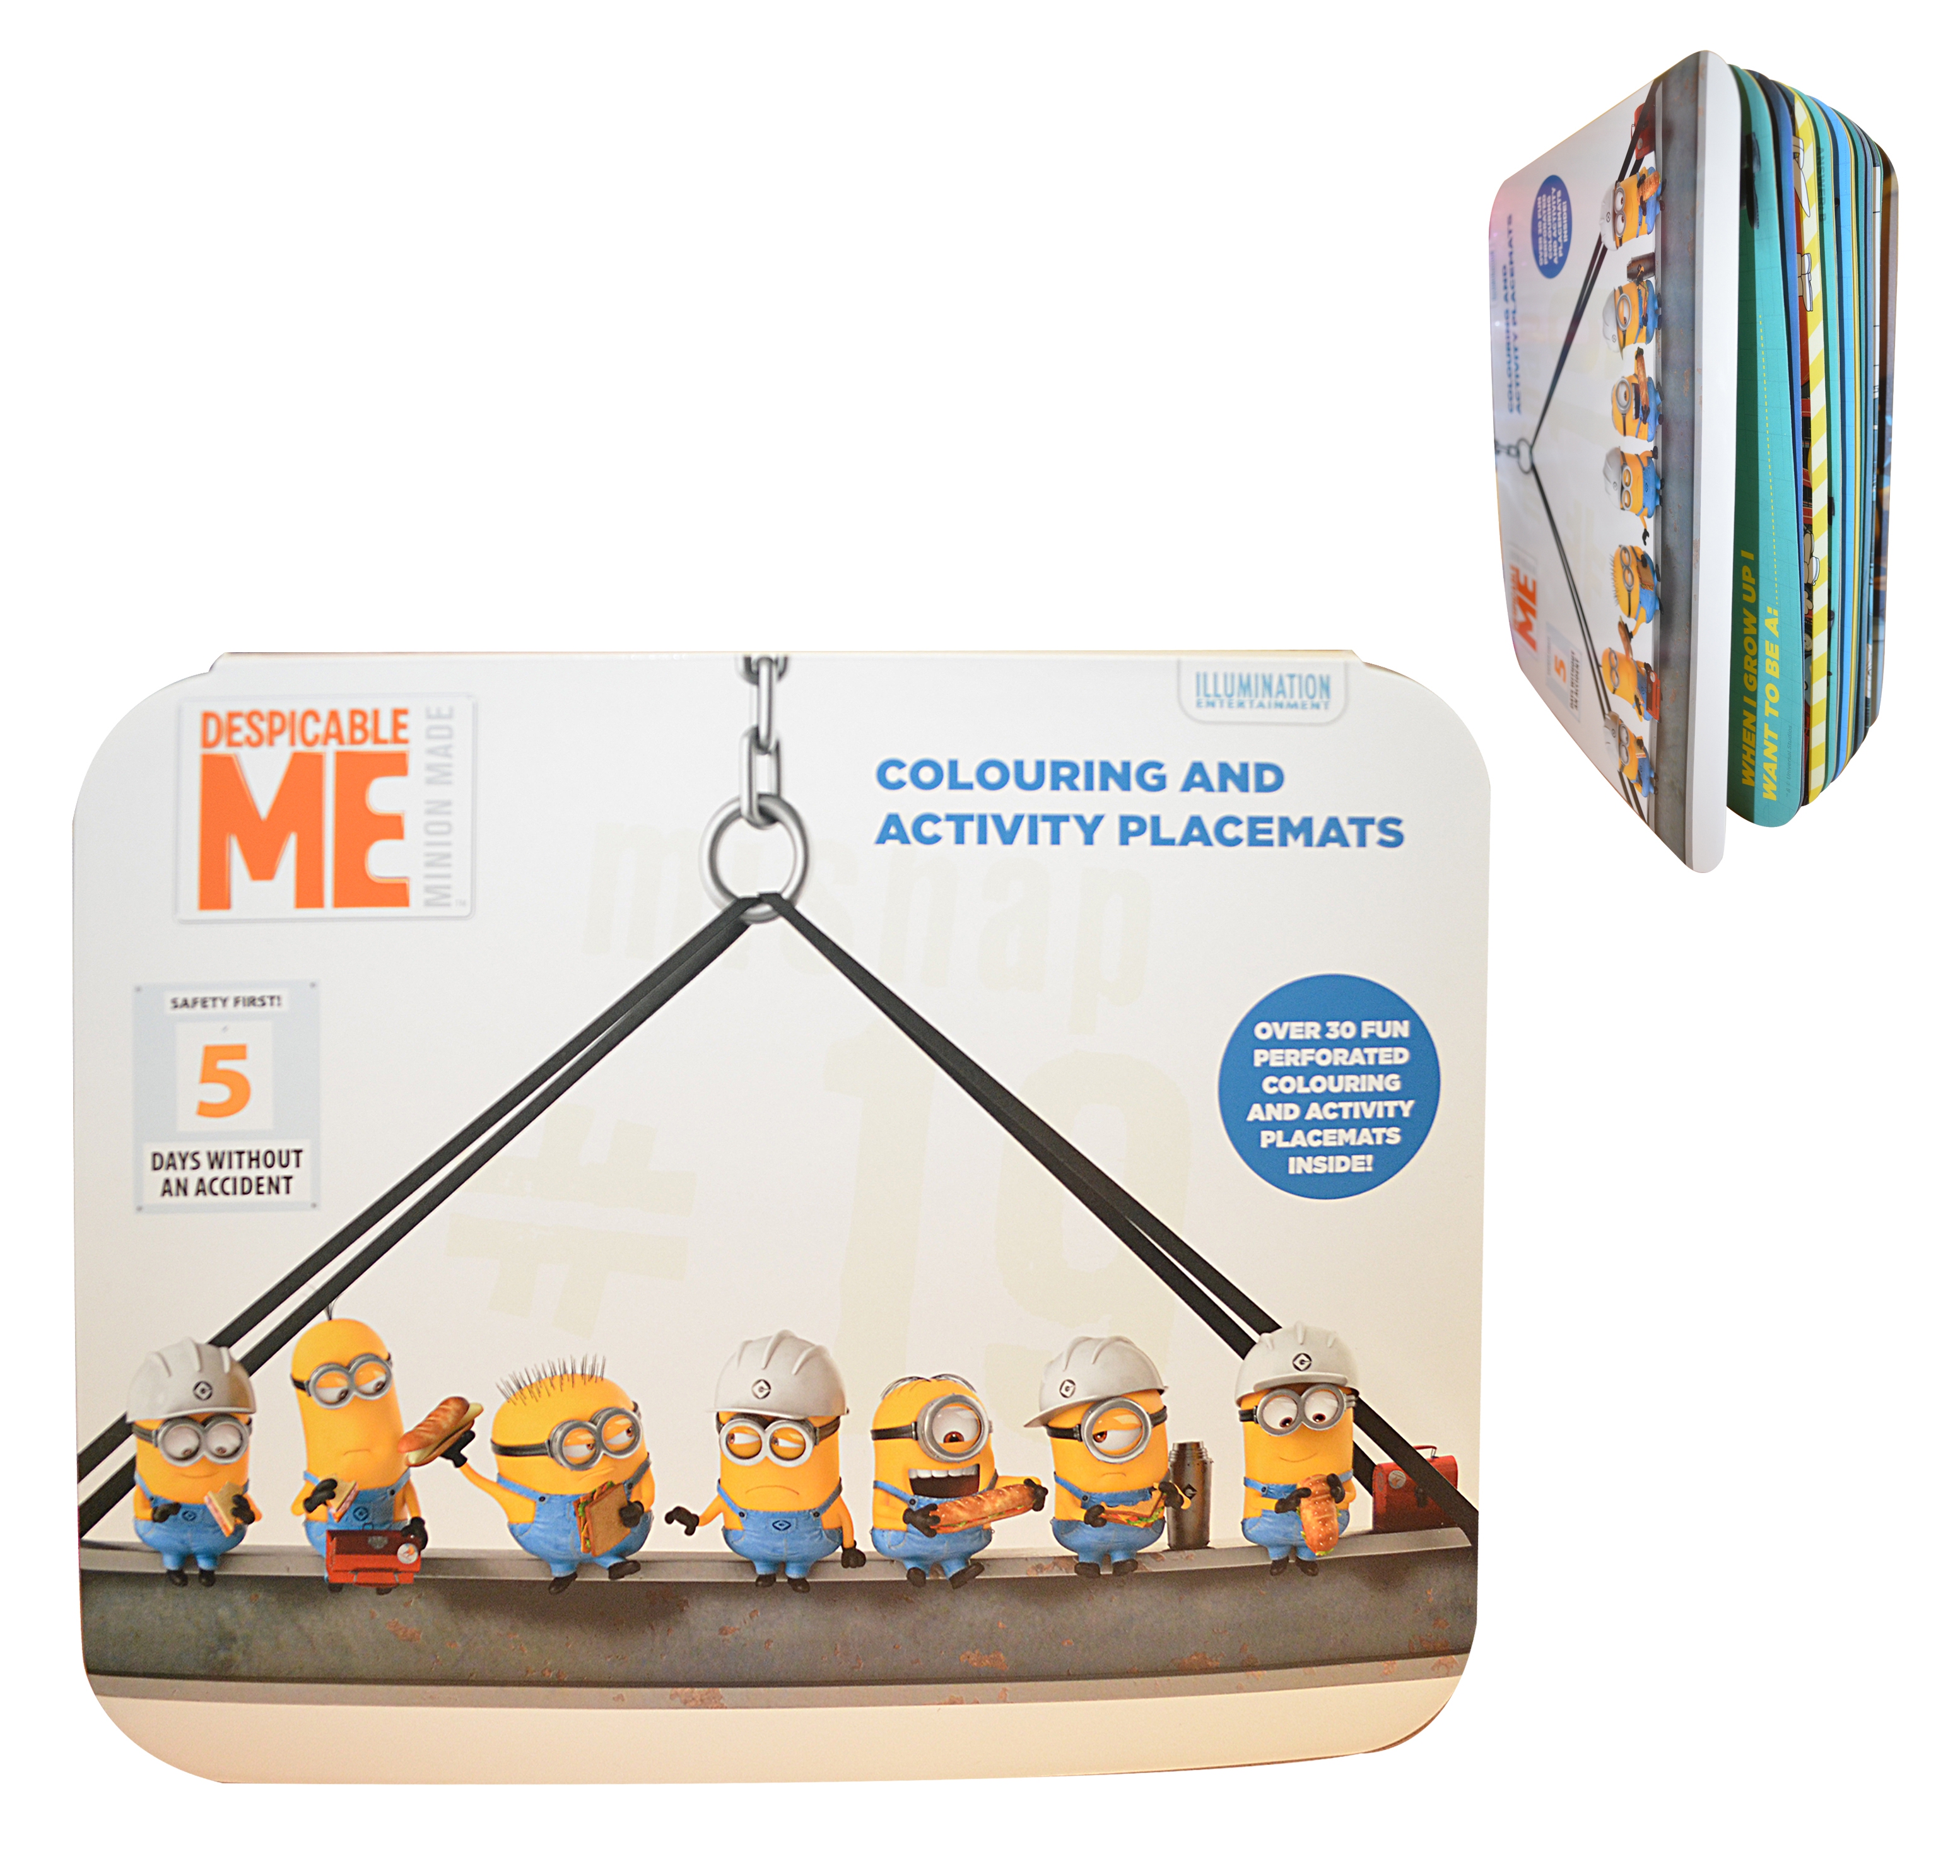 Despicable Me Minions Colouring and Activity Placemats Stationery